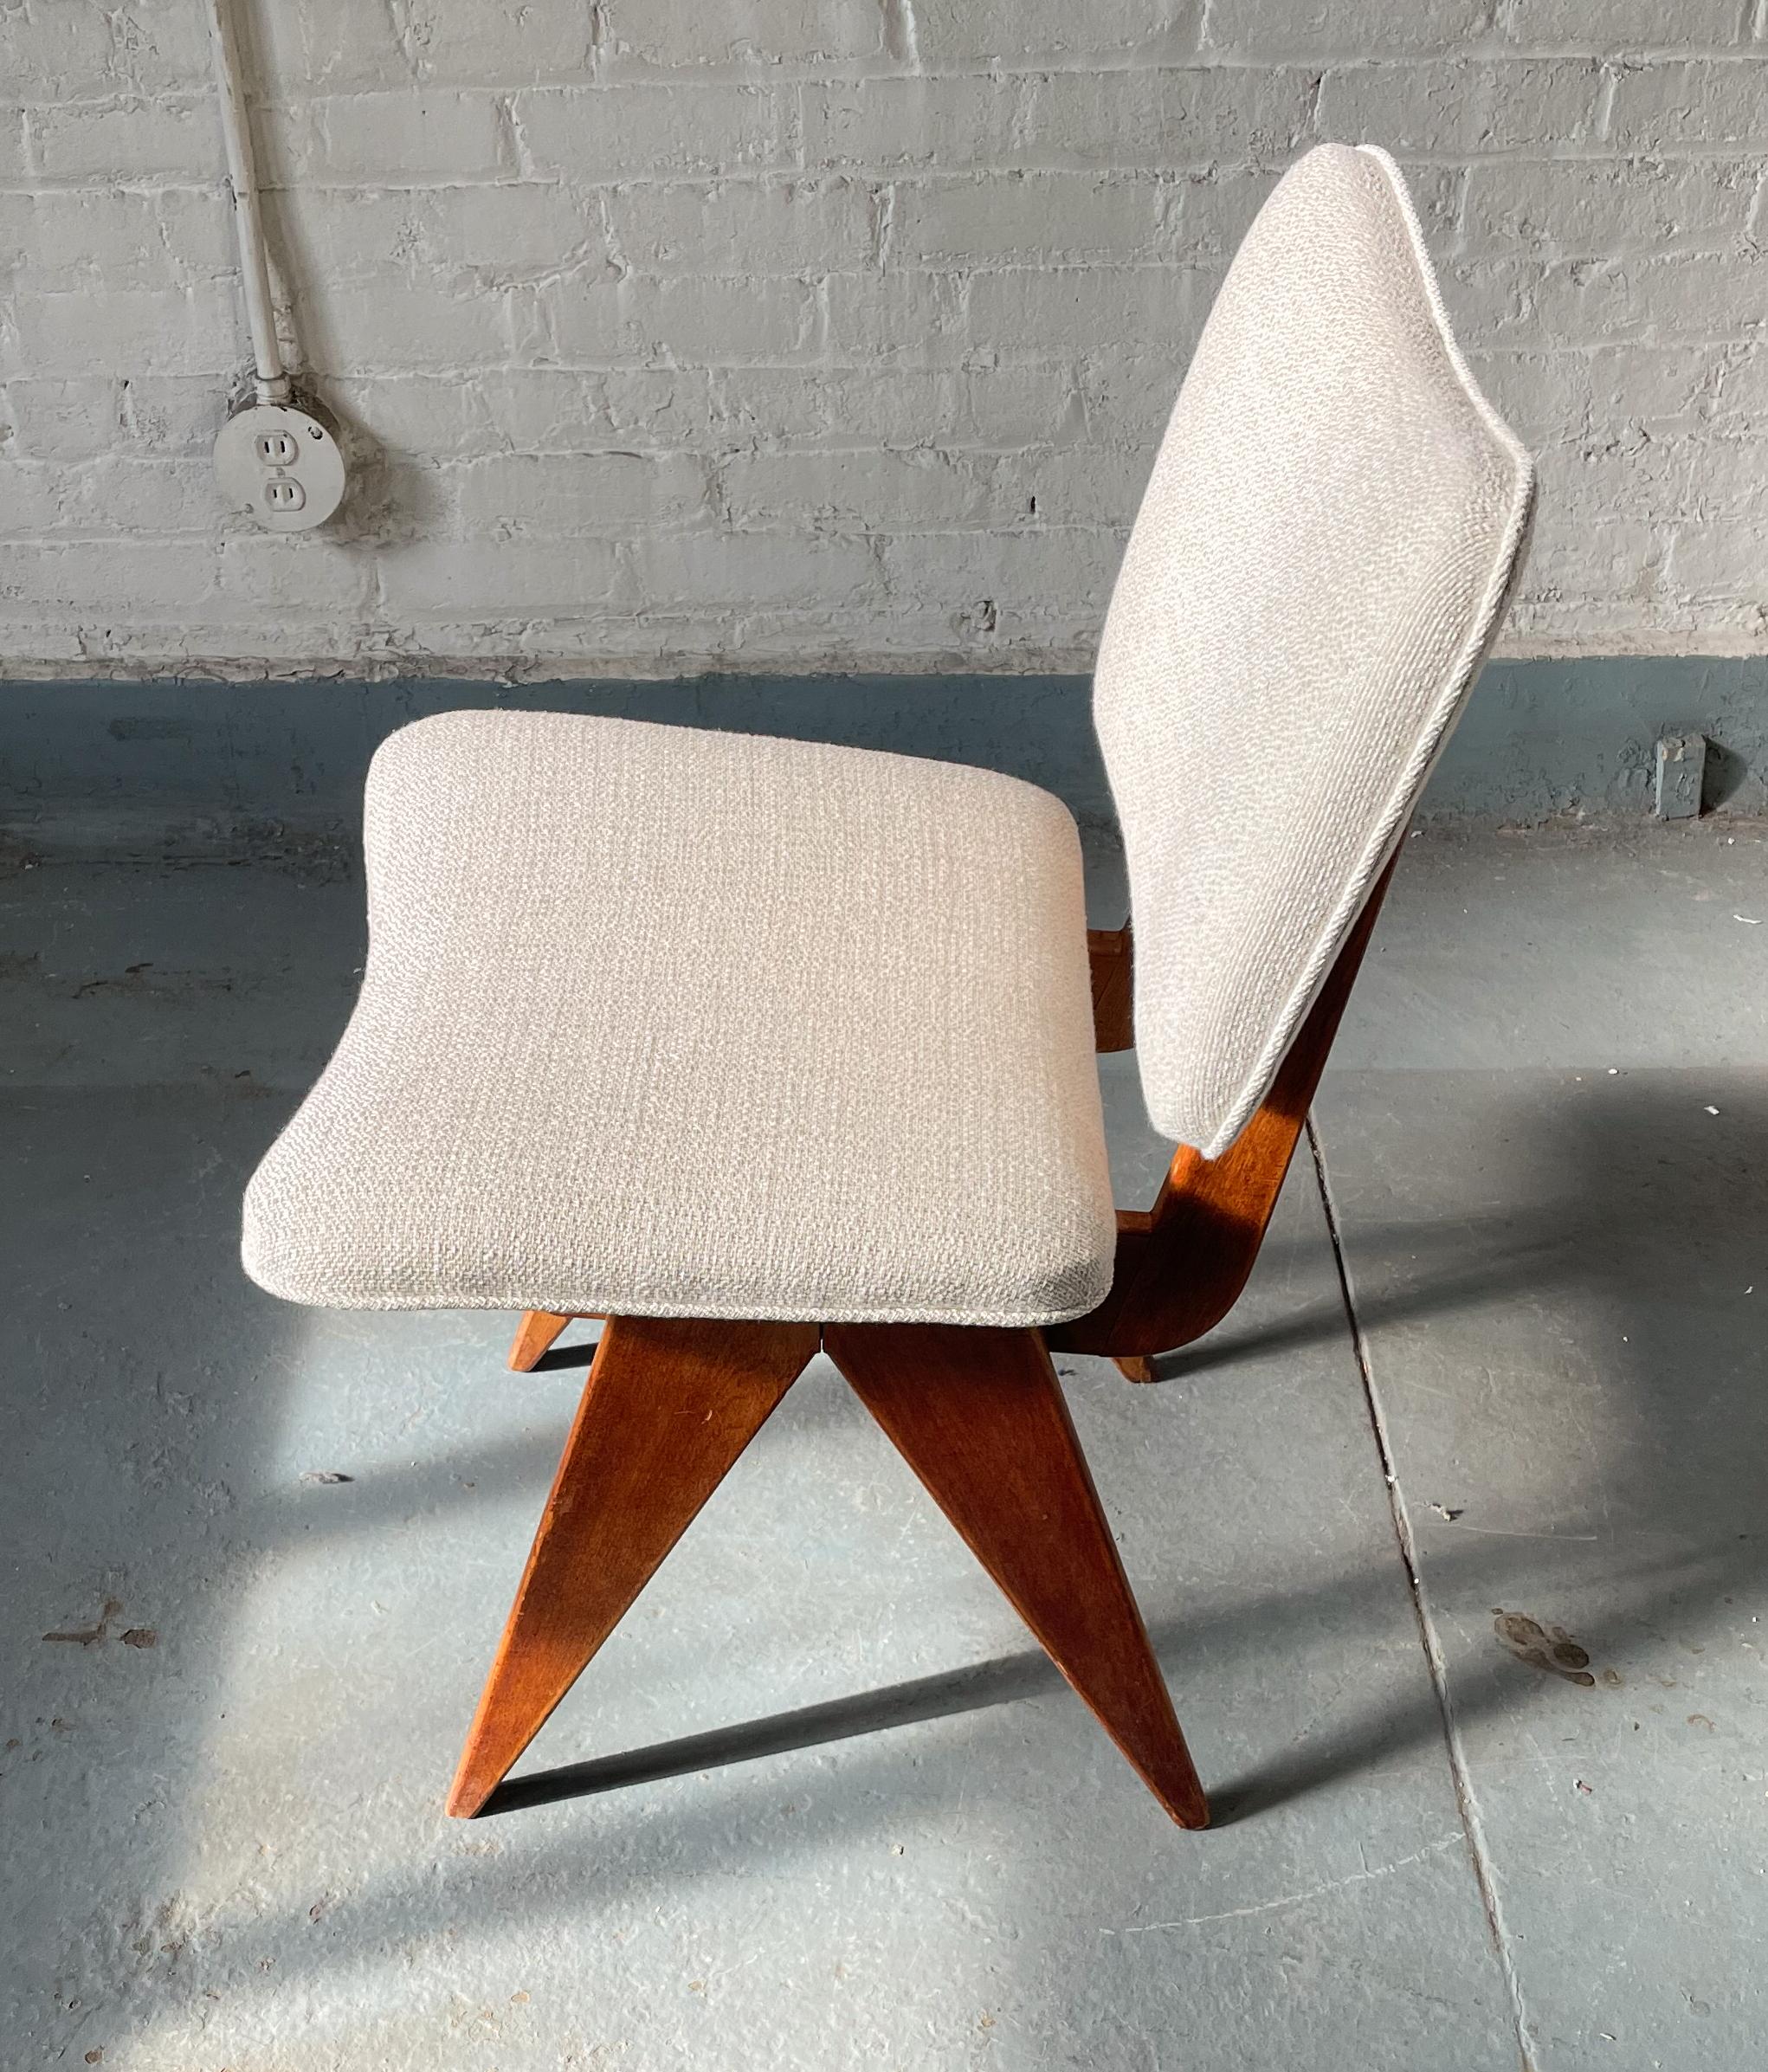 Single Early Jens Risom Chair for His Own Company 1